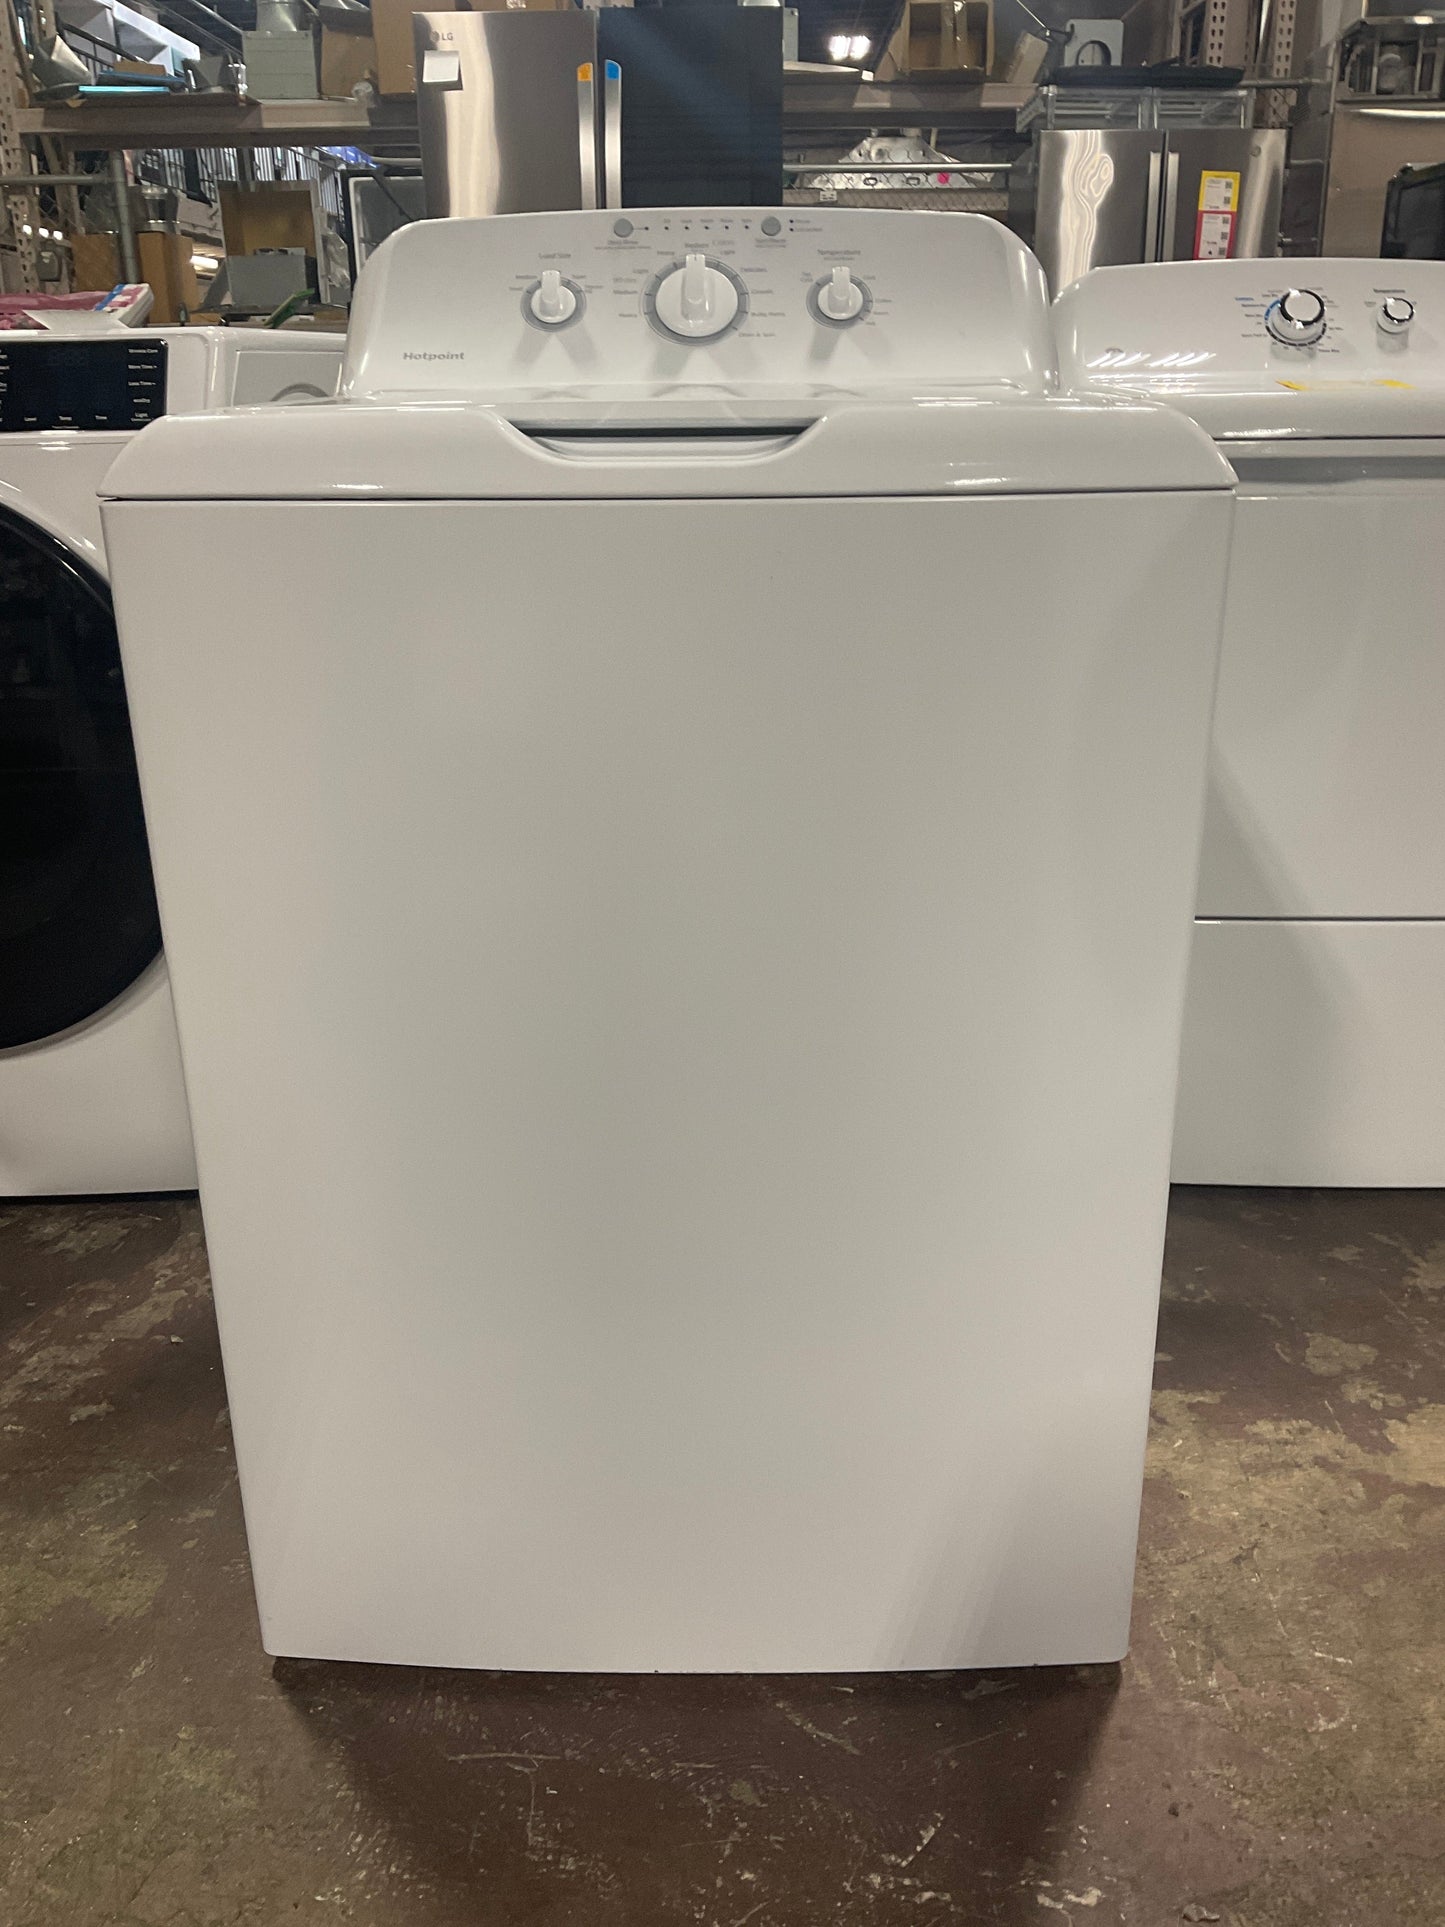 GE Hotpoint® 3.8 cu. ft. Capacity Washer with Stainless Steel Basket